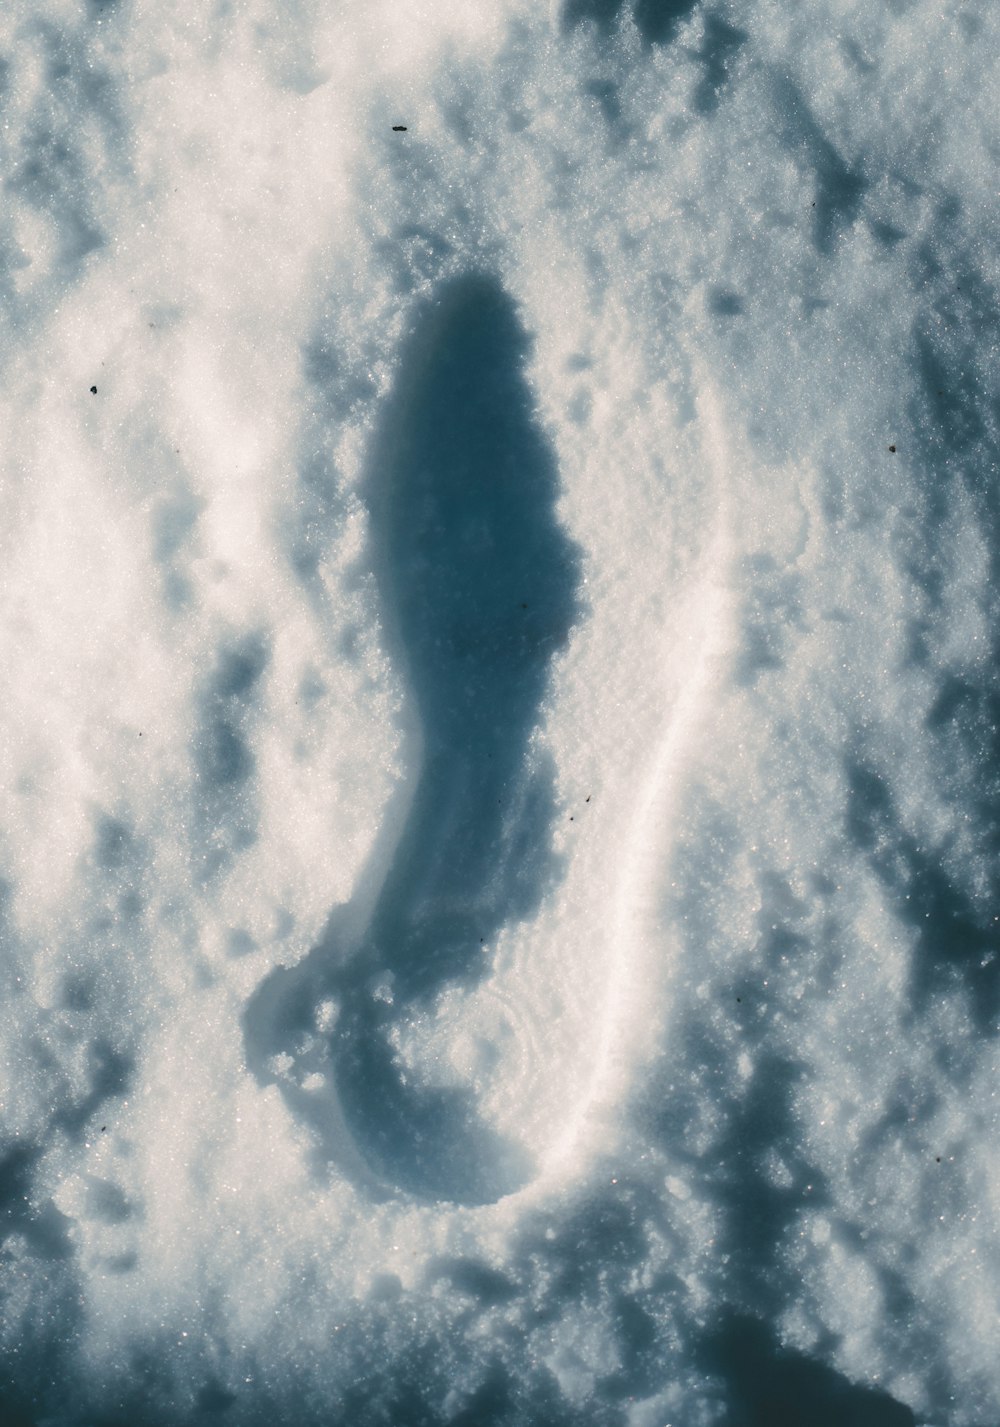 a picture of a foot print in the snow